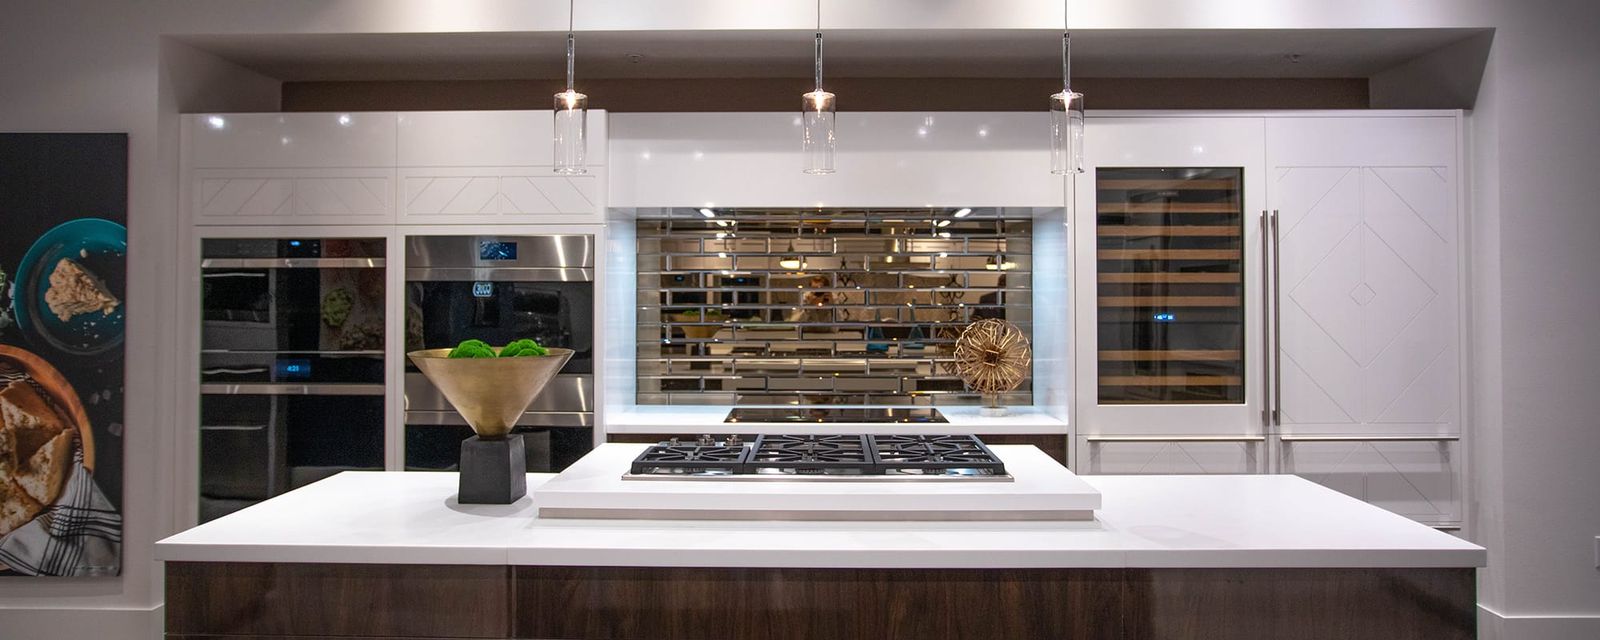 How Smeg Appliances Bring You the Retro Kitchen of Your Dreams, Friedmans  Appliance, Bay Area